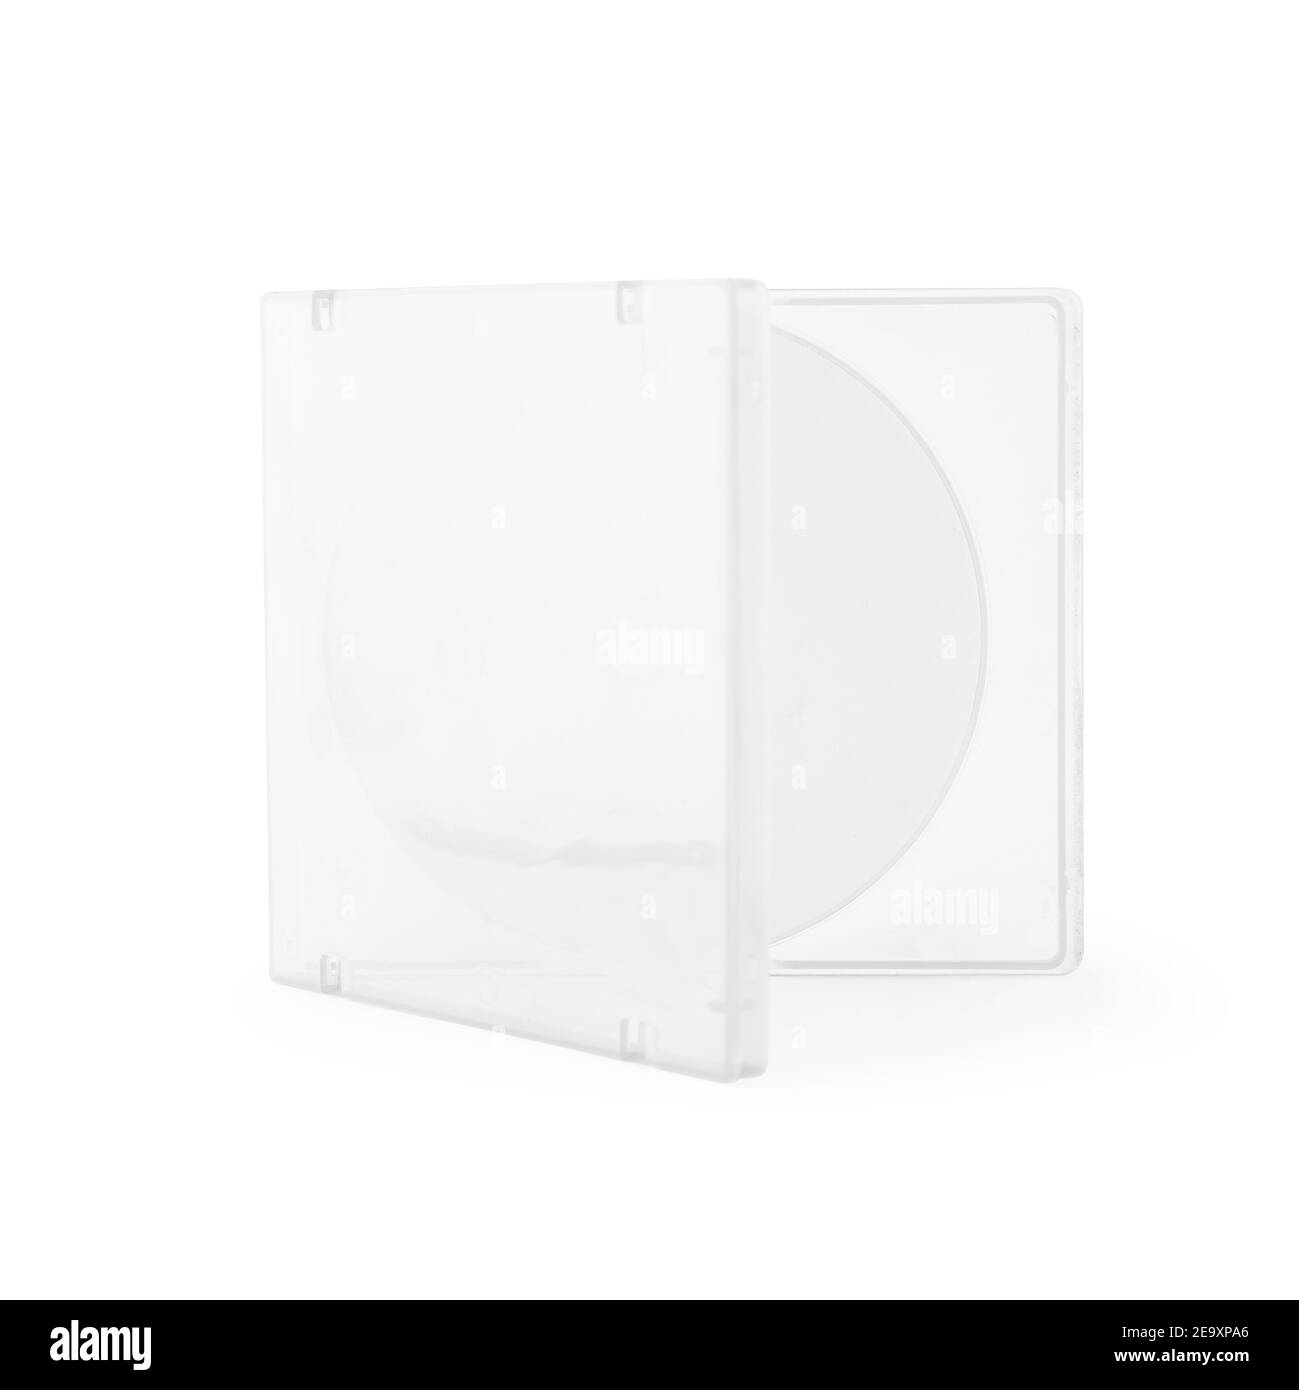 Realistic white cd with box cover template isolated on white background with clipping path. Stock Photo